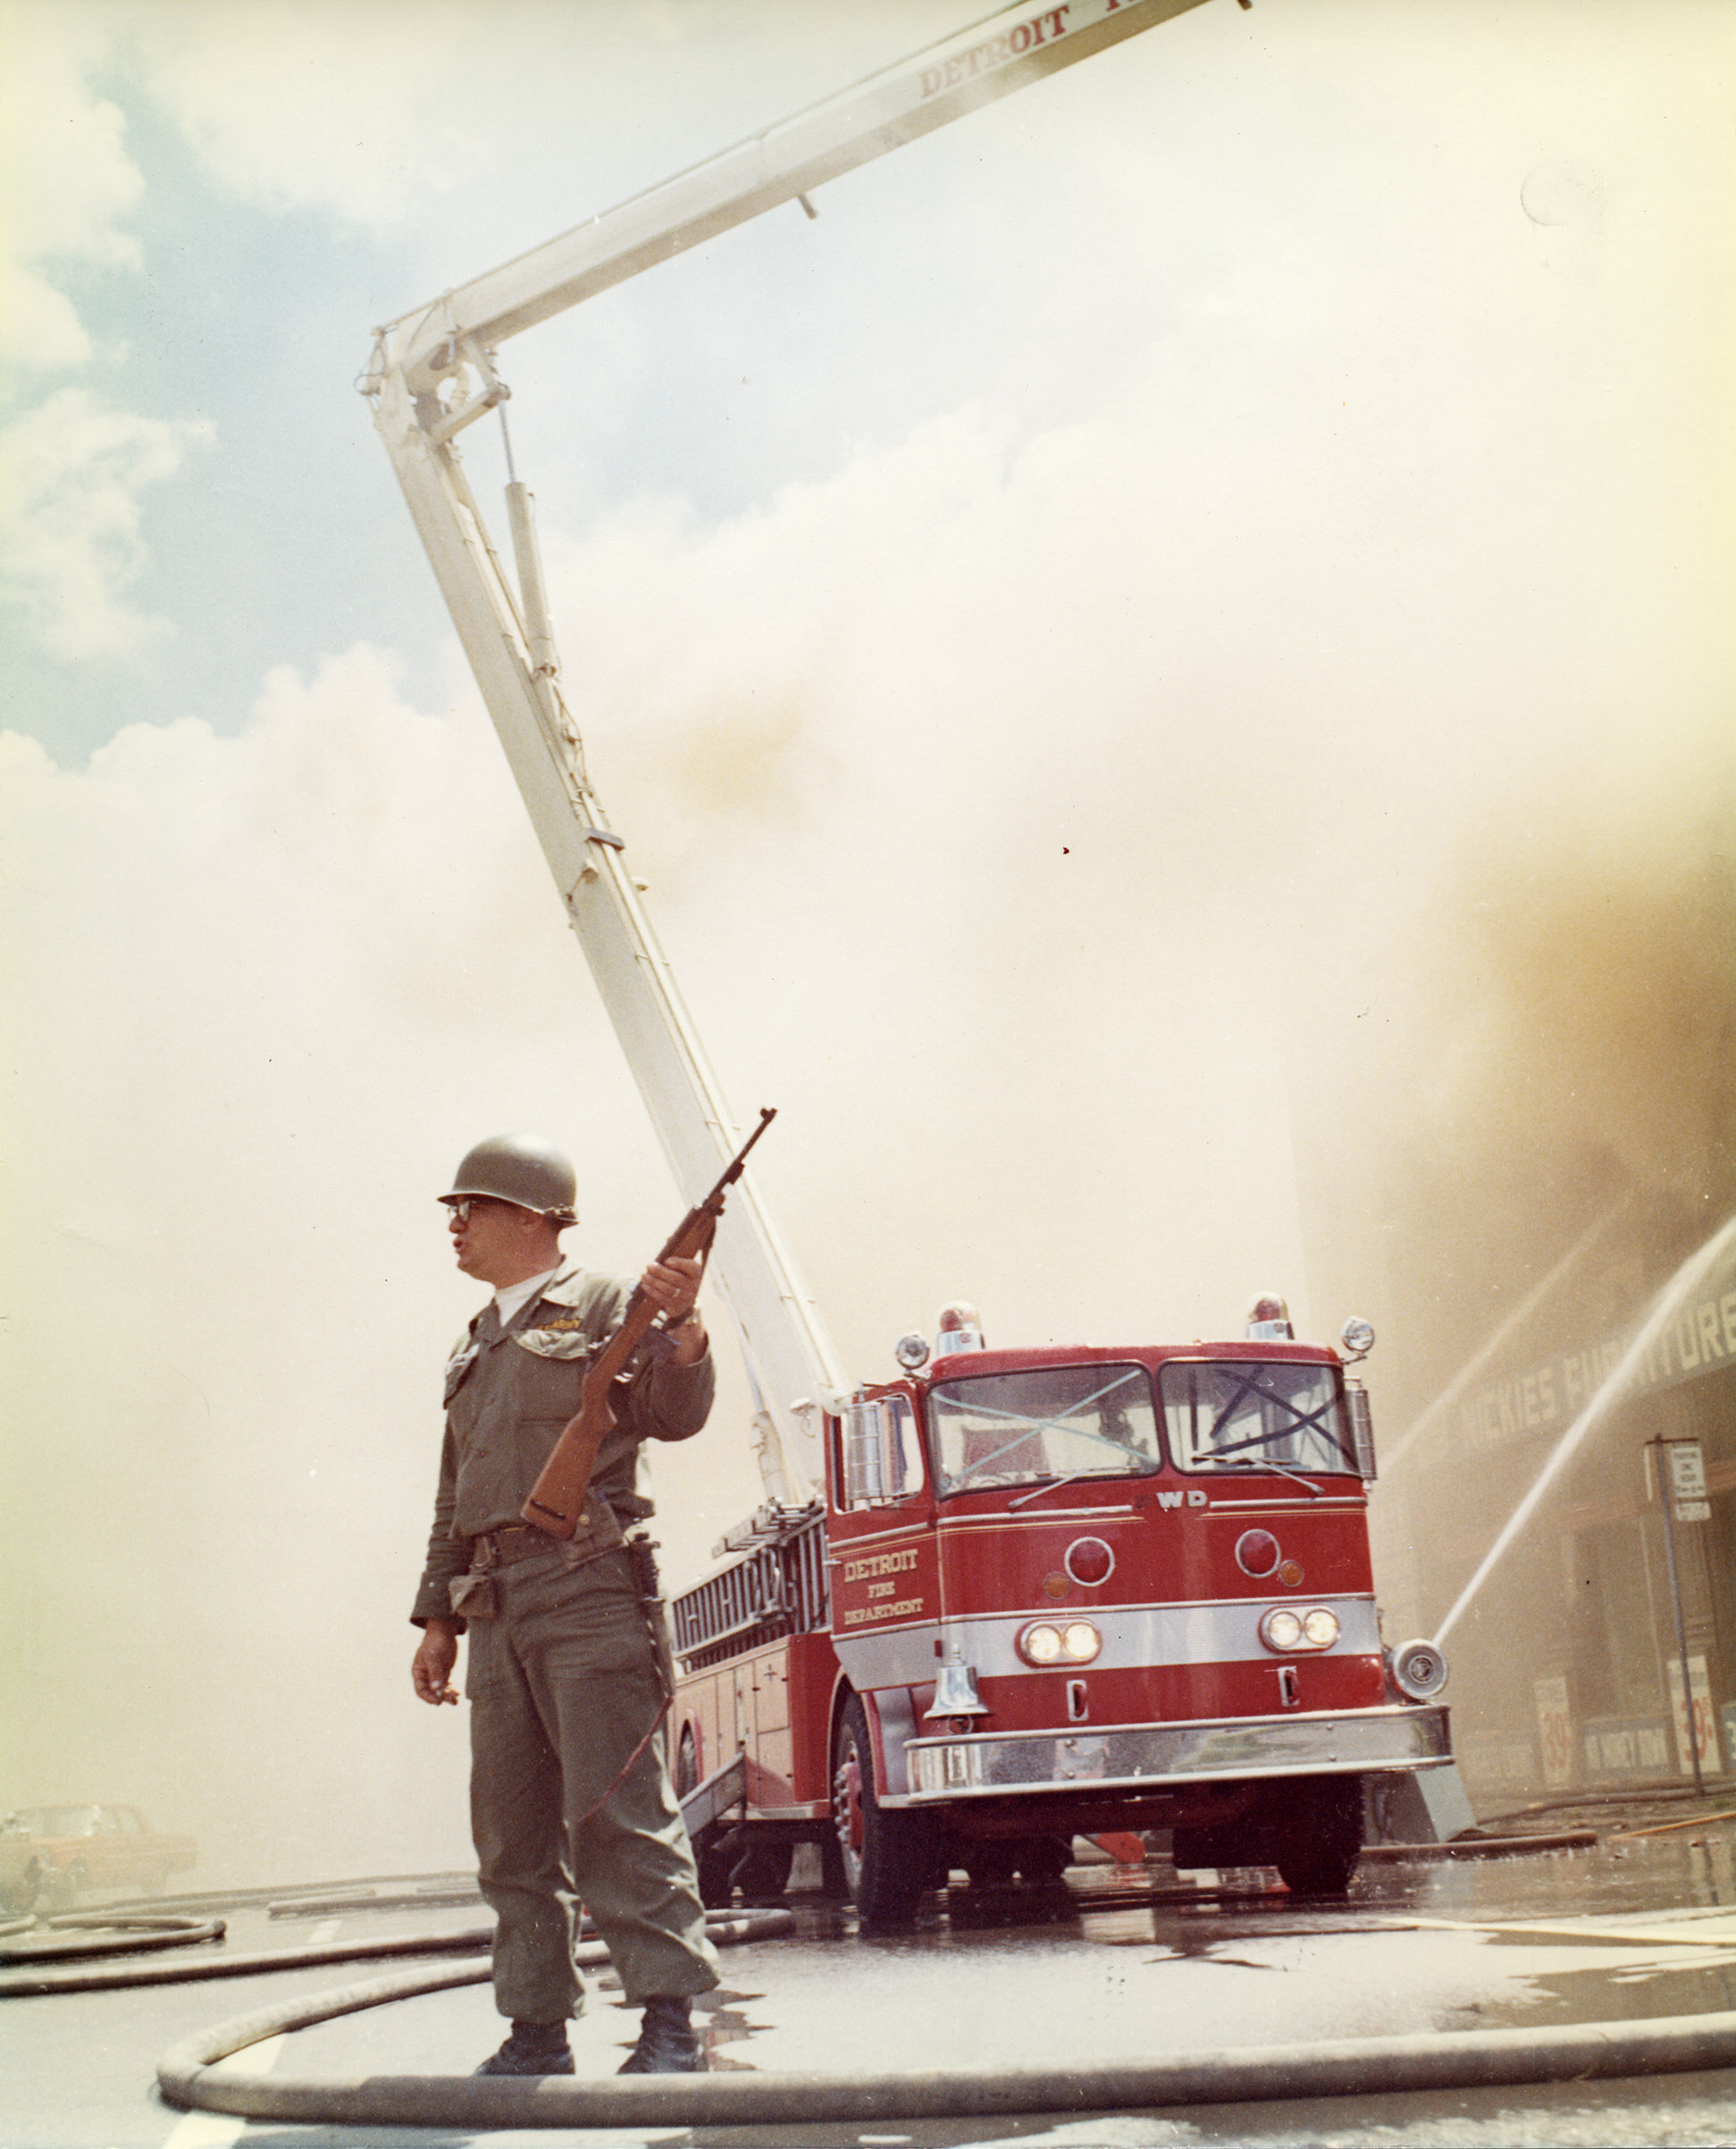 A U.S. army soldier watches the streets while the Detroit Fire Department extinguishes a blaze at Nickie’s Furniture store on Grand River Avenue near Forest in Detroit.